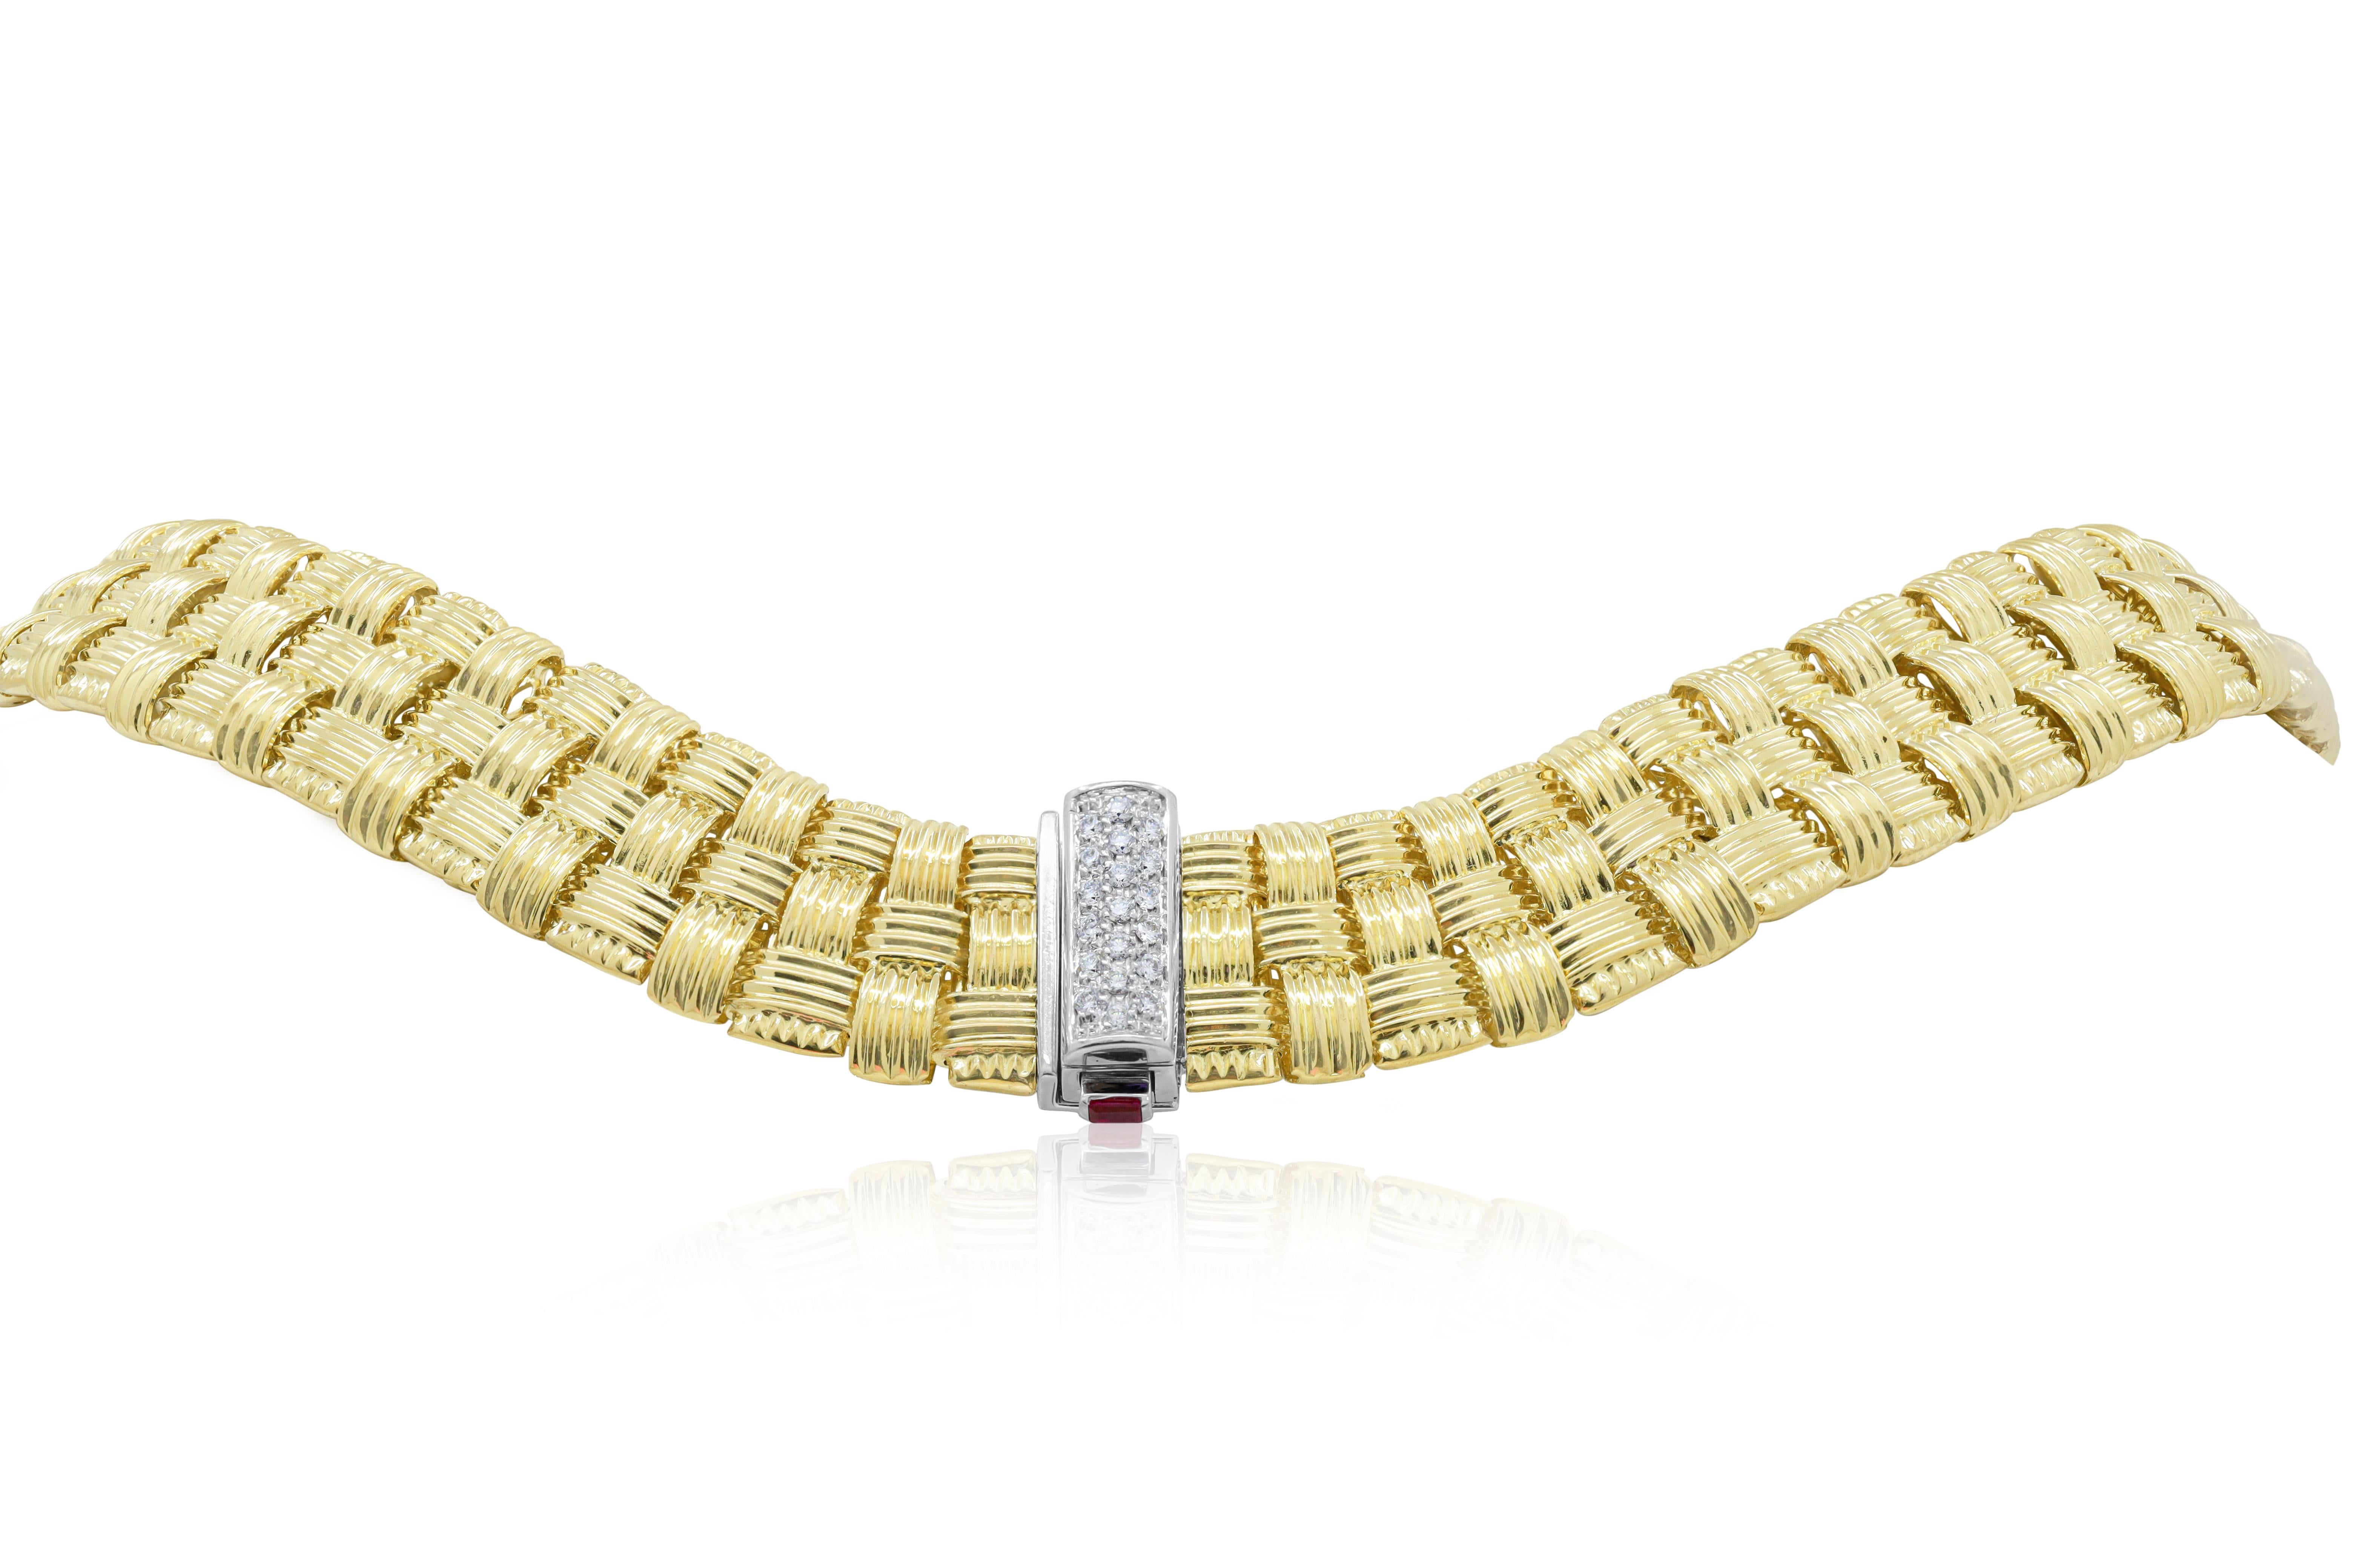  18kt Roberto Coin Necklace Woven Design  In New Condition For Sale In New York, NY